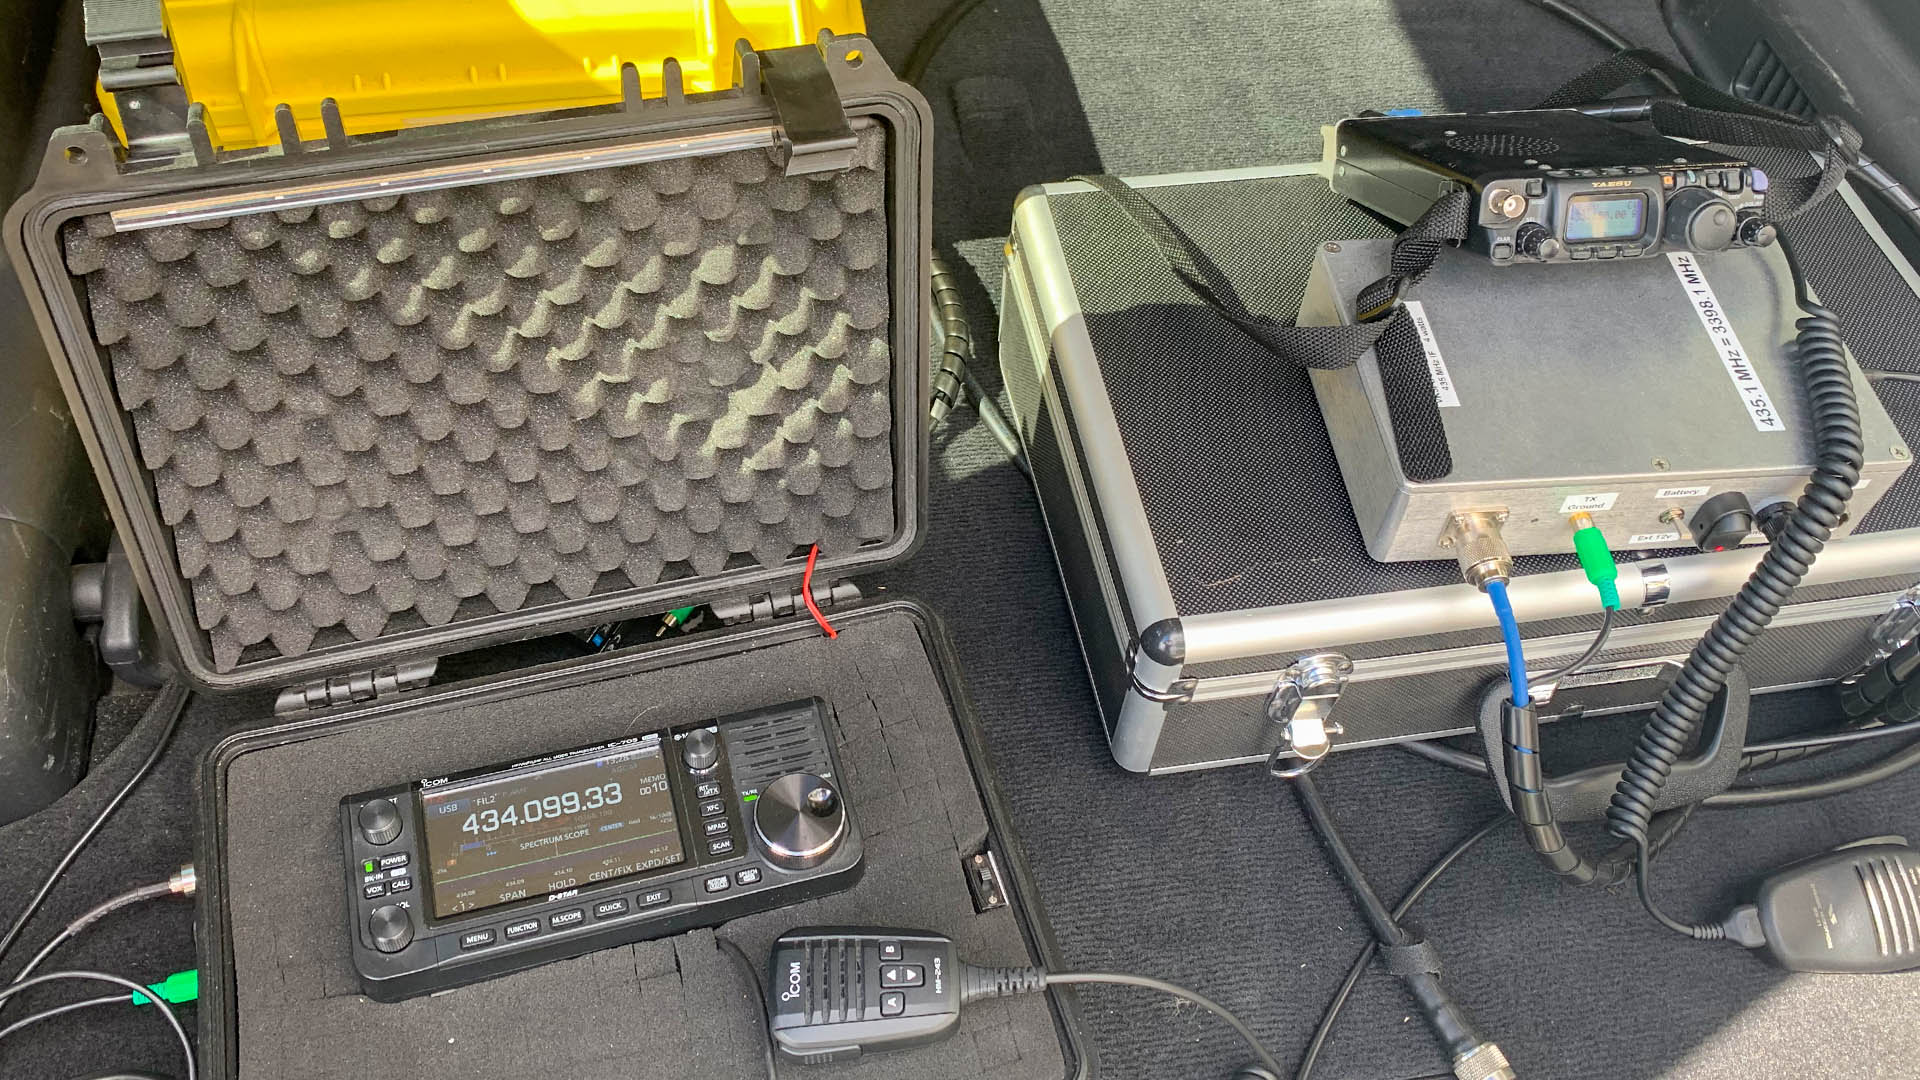 Picture of 10 GHz and 3.4 GHz setup in the back of the VK3FS car.